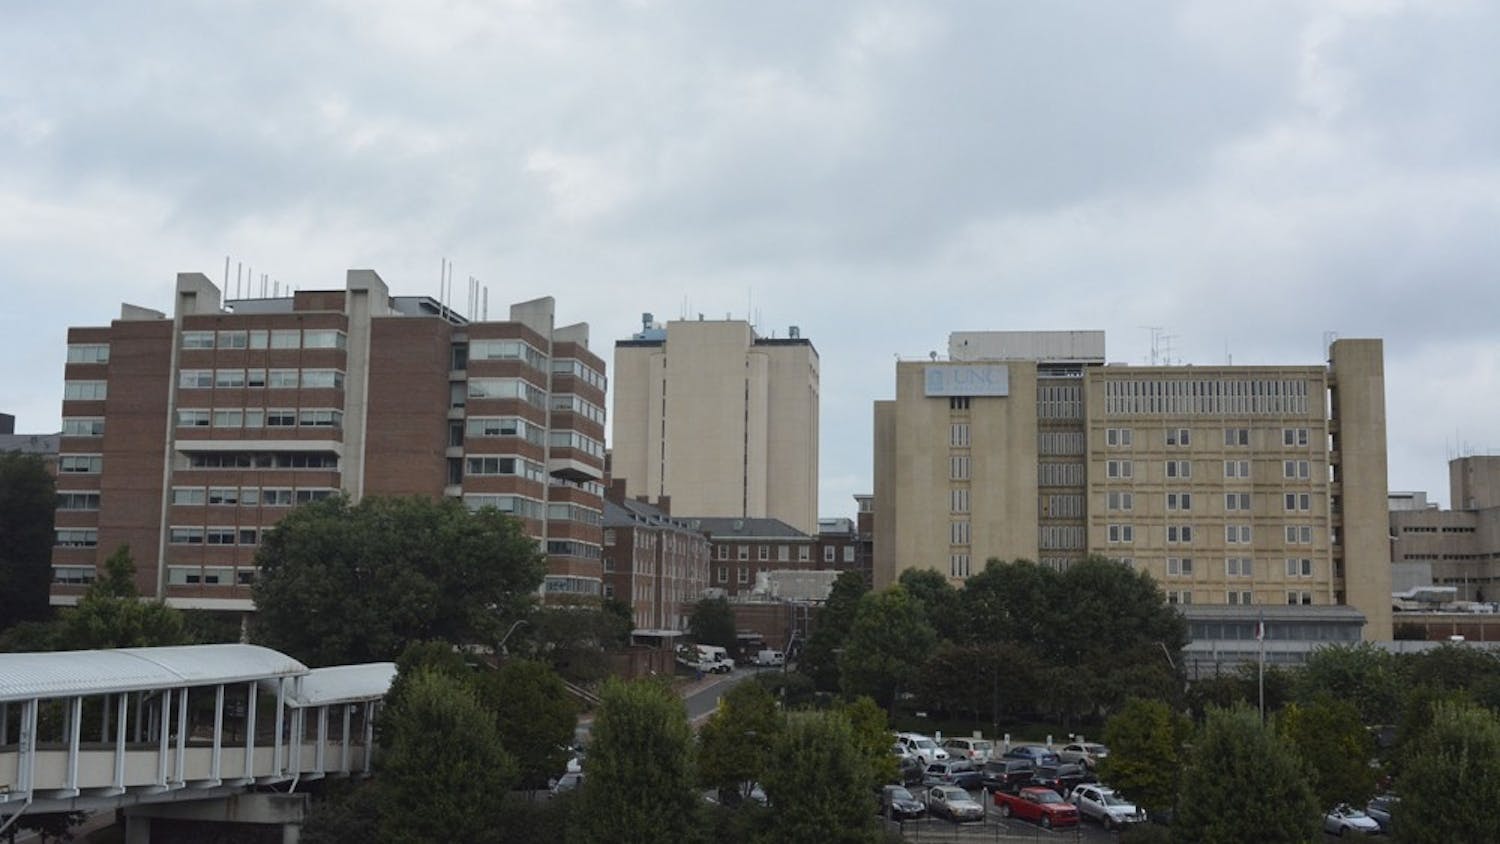 UNC Hospitals are expanding their area and also becoming more crowded.